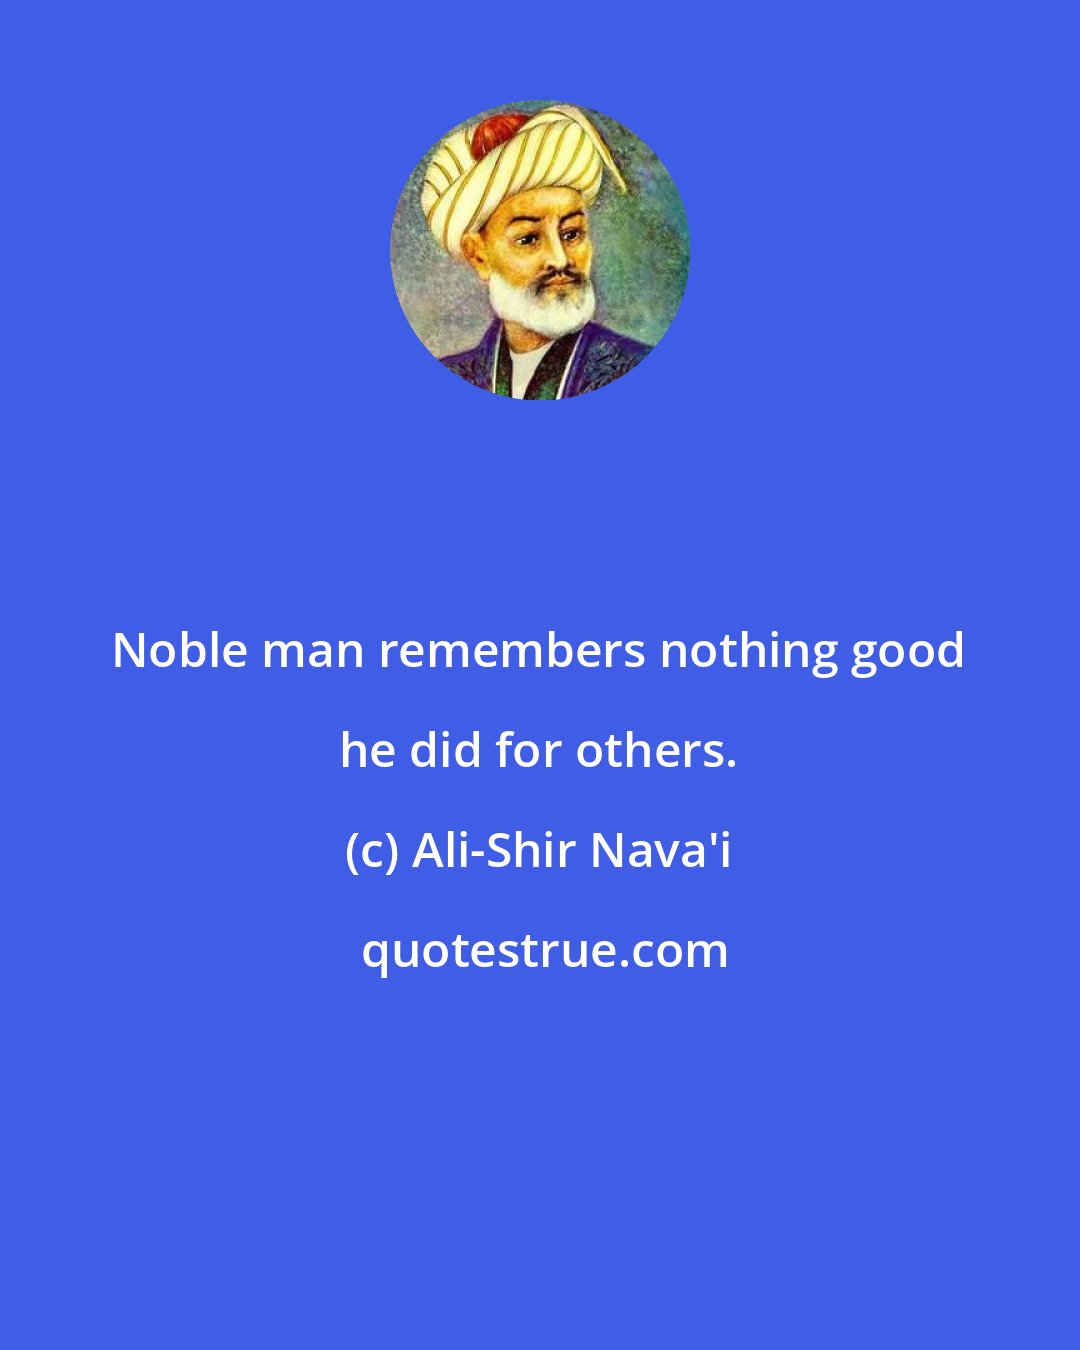 Ali-Shir Nava'i: Noble man remembers nothing good he did for others.